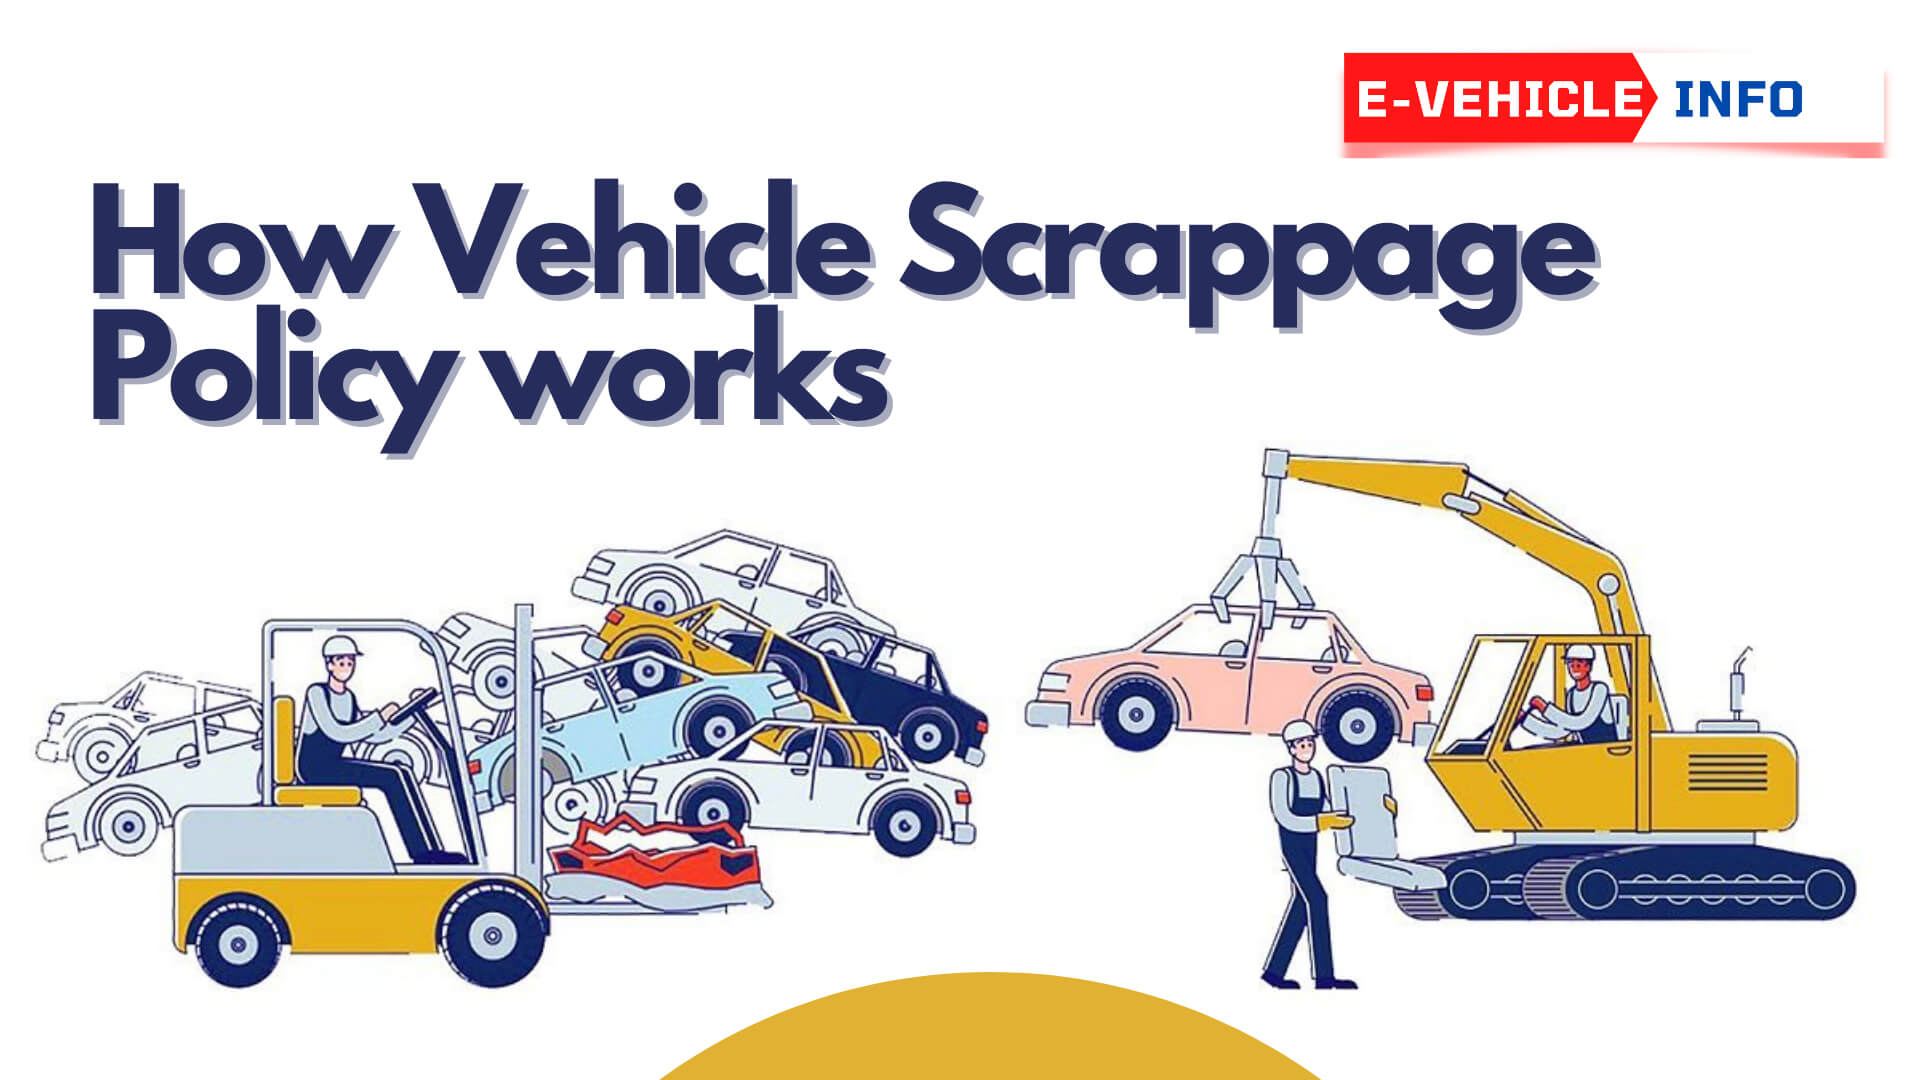 https://e-vehicleinfo.com/vehicle-scrappage-policy-for-electric-vehicle/